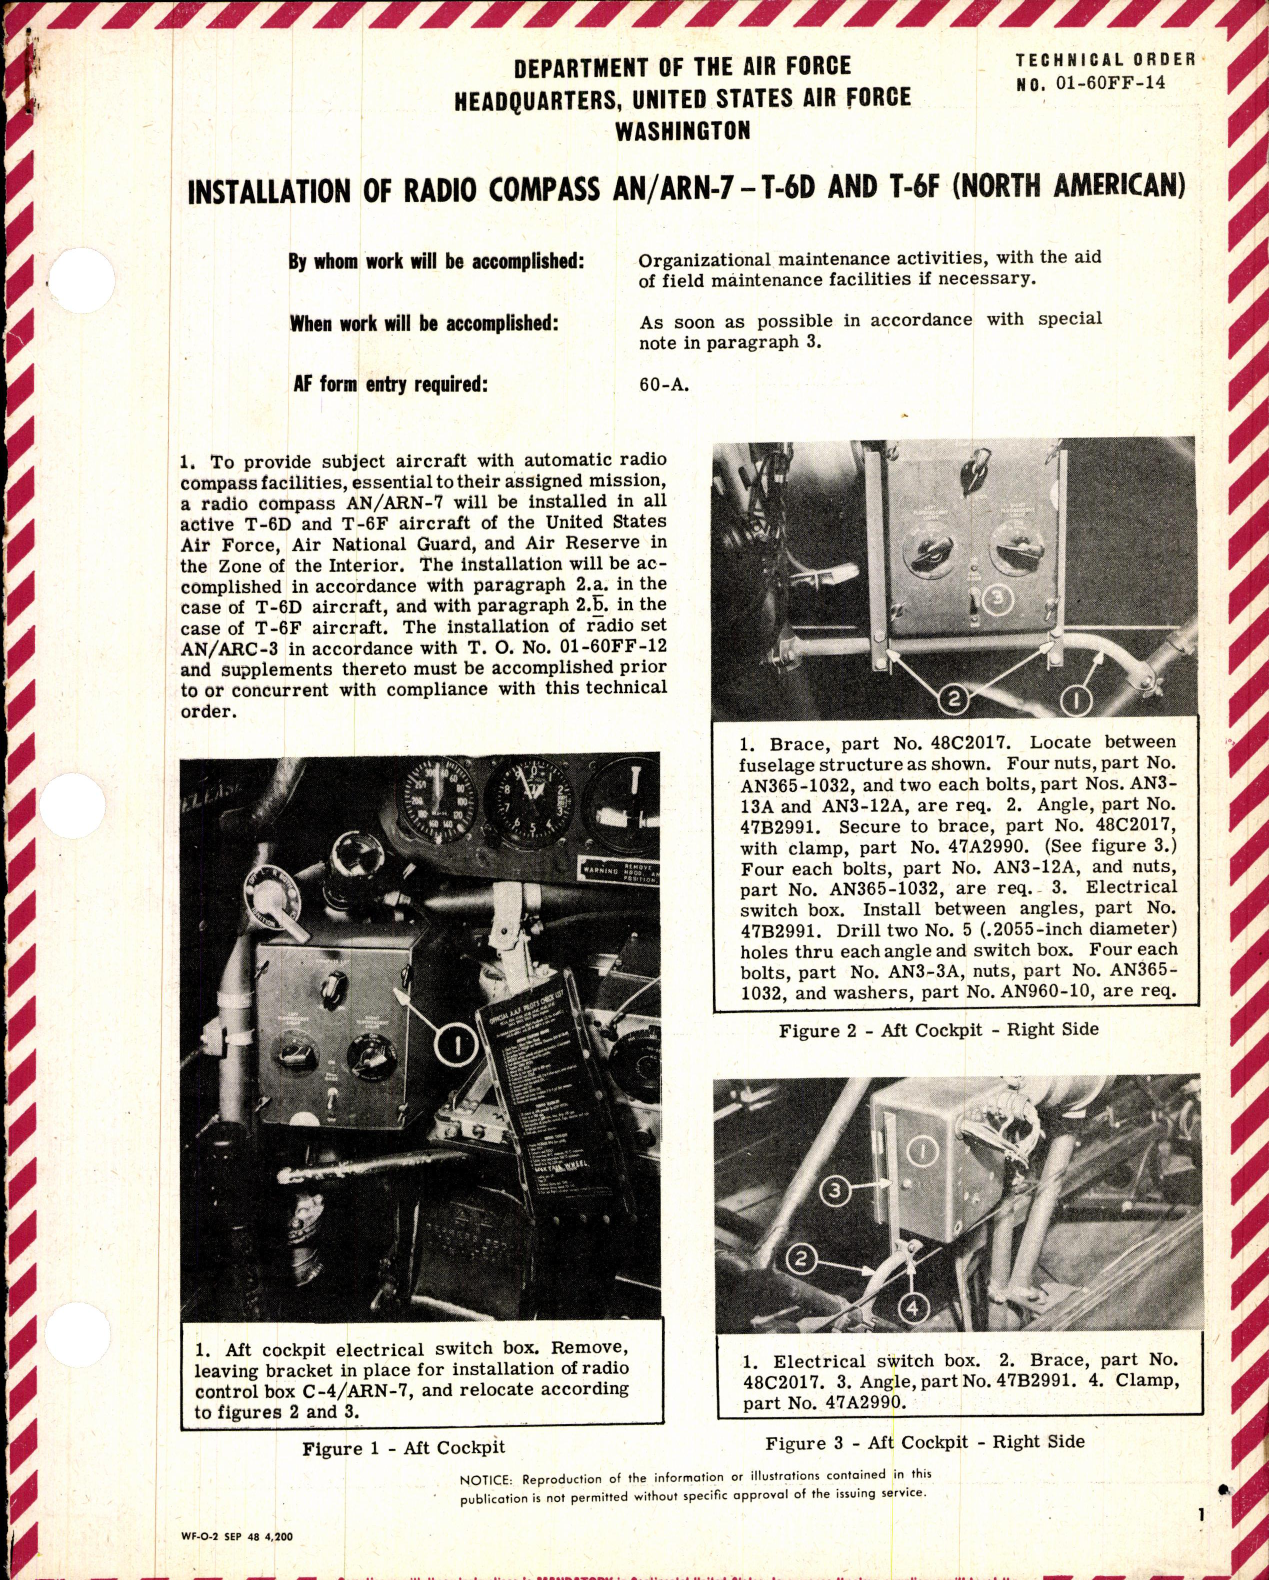 Sample page 1 from AirCorps Library document: Installation of Radio Compass AN/ARN-7 for T-6D and T-6F